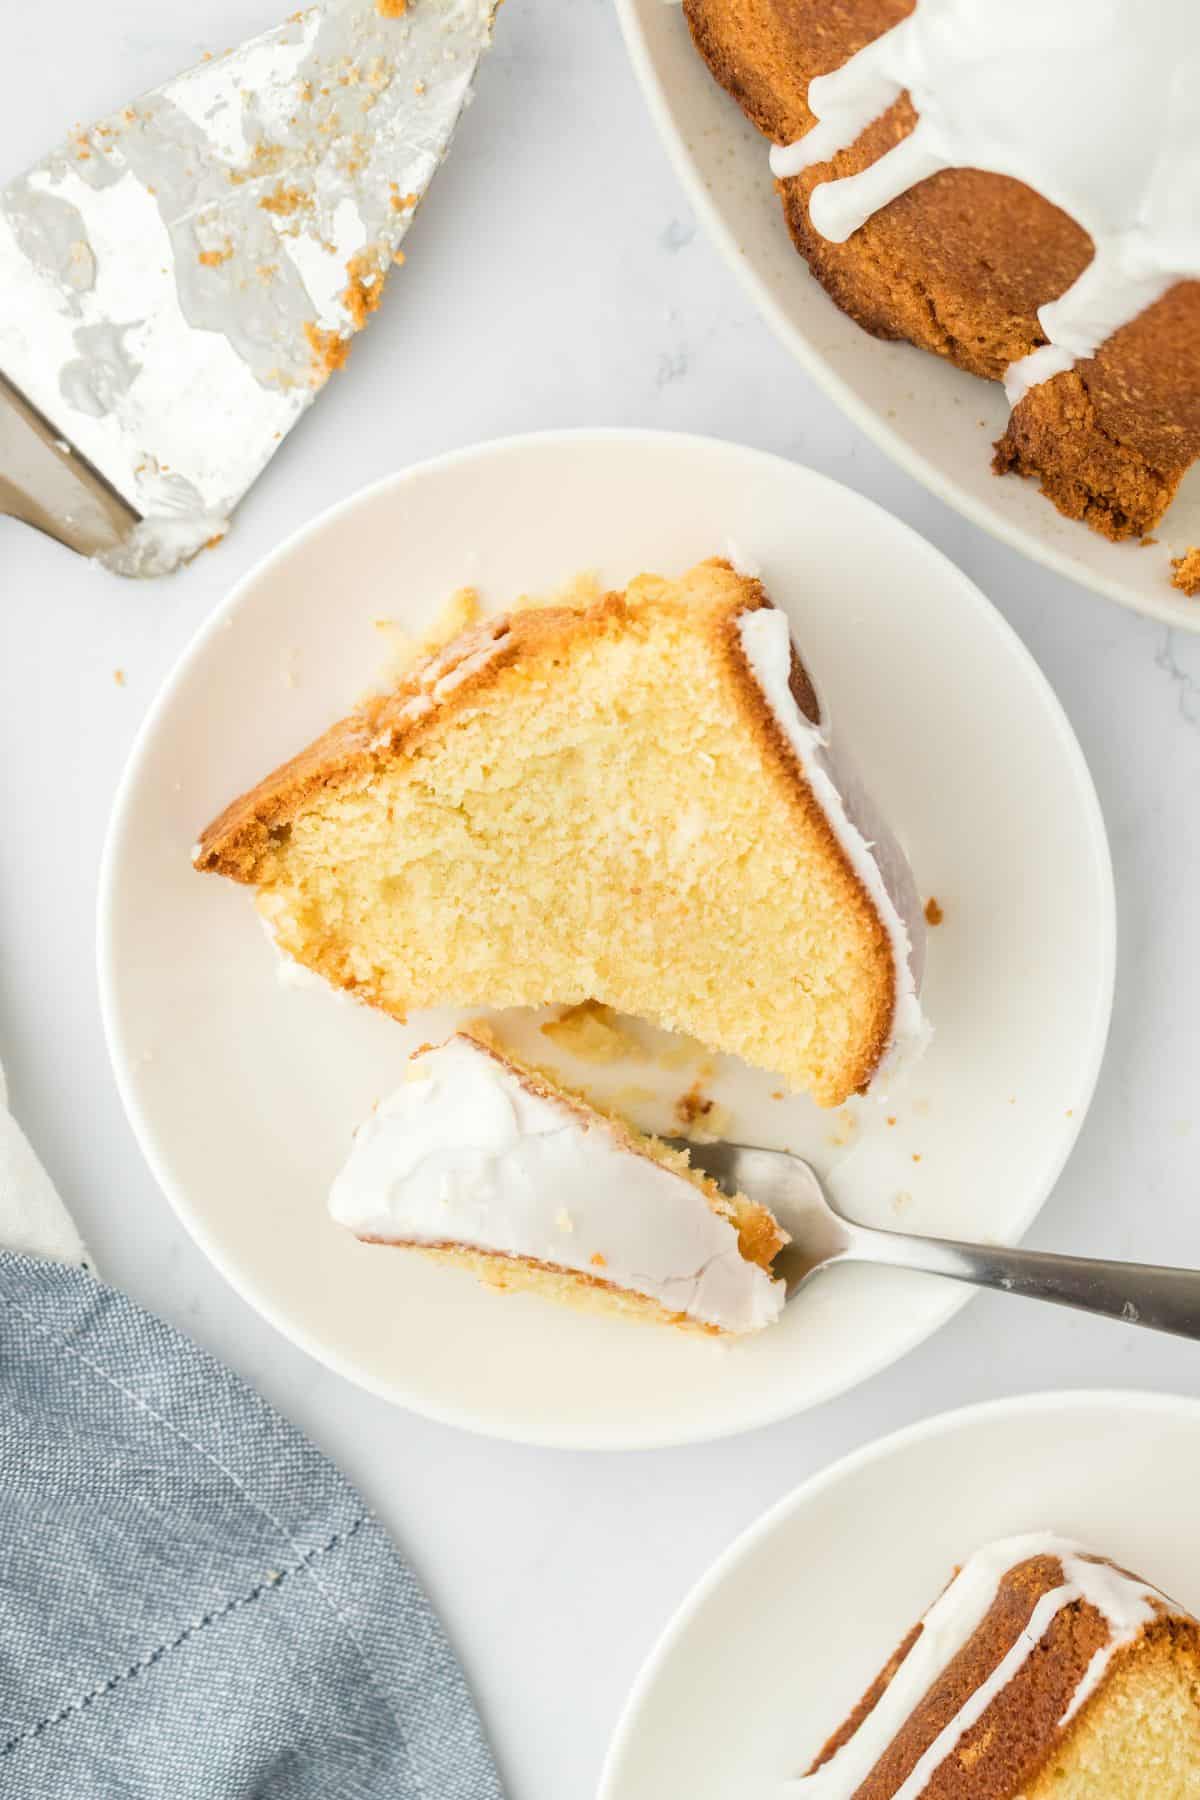 Overhead shot of a slice of million dollar pound cake with creamy white glaze, resting on a white plate with a portion of the slice on a fork next to it